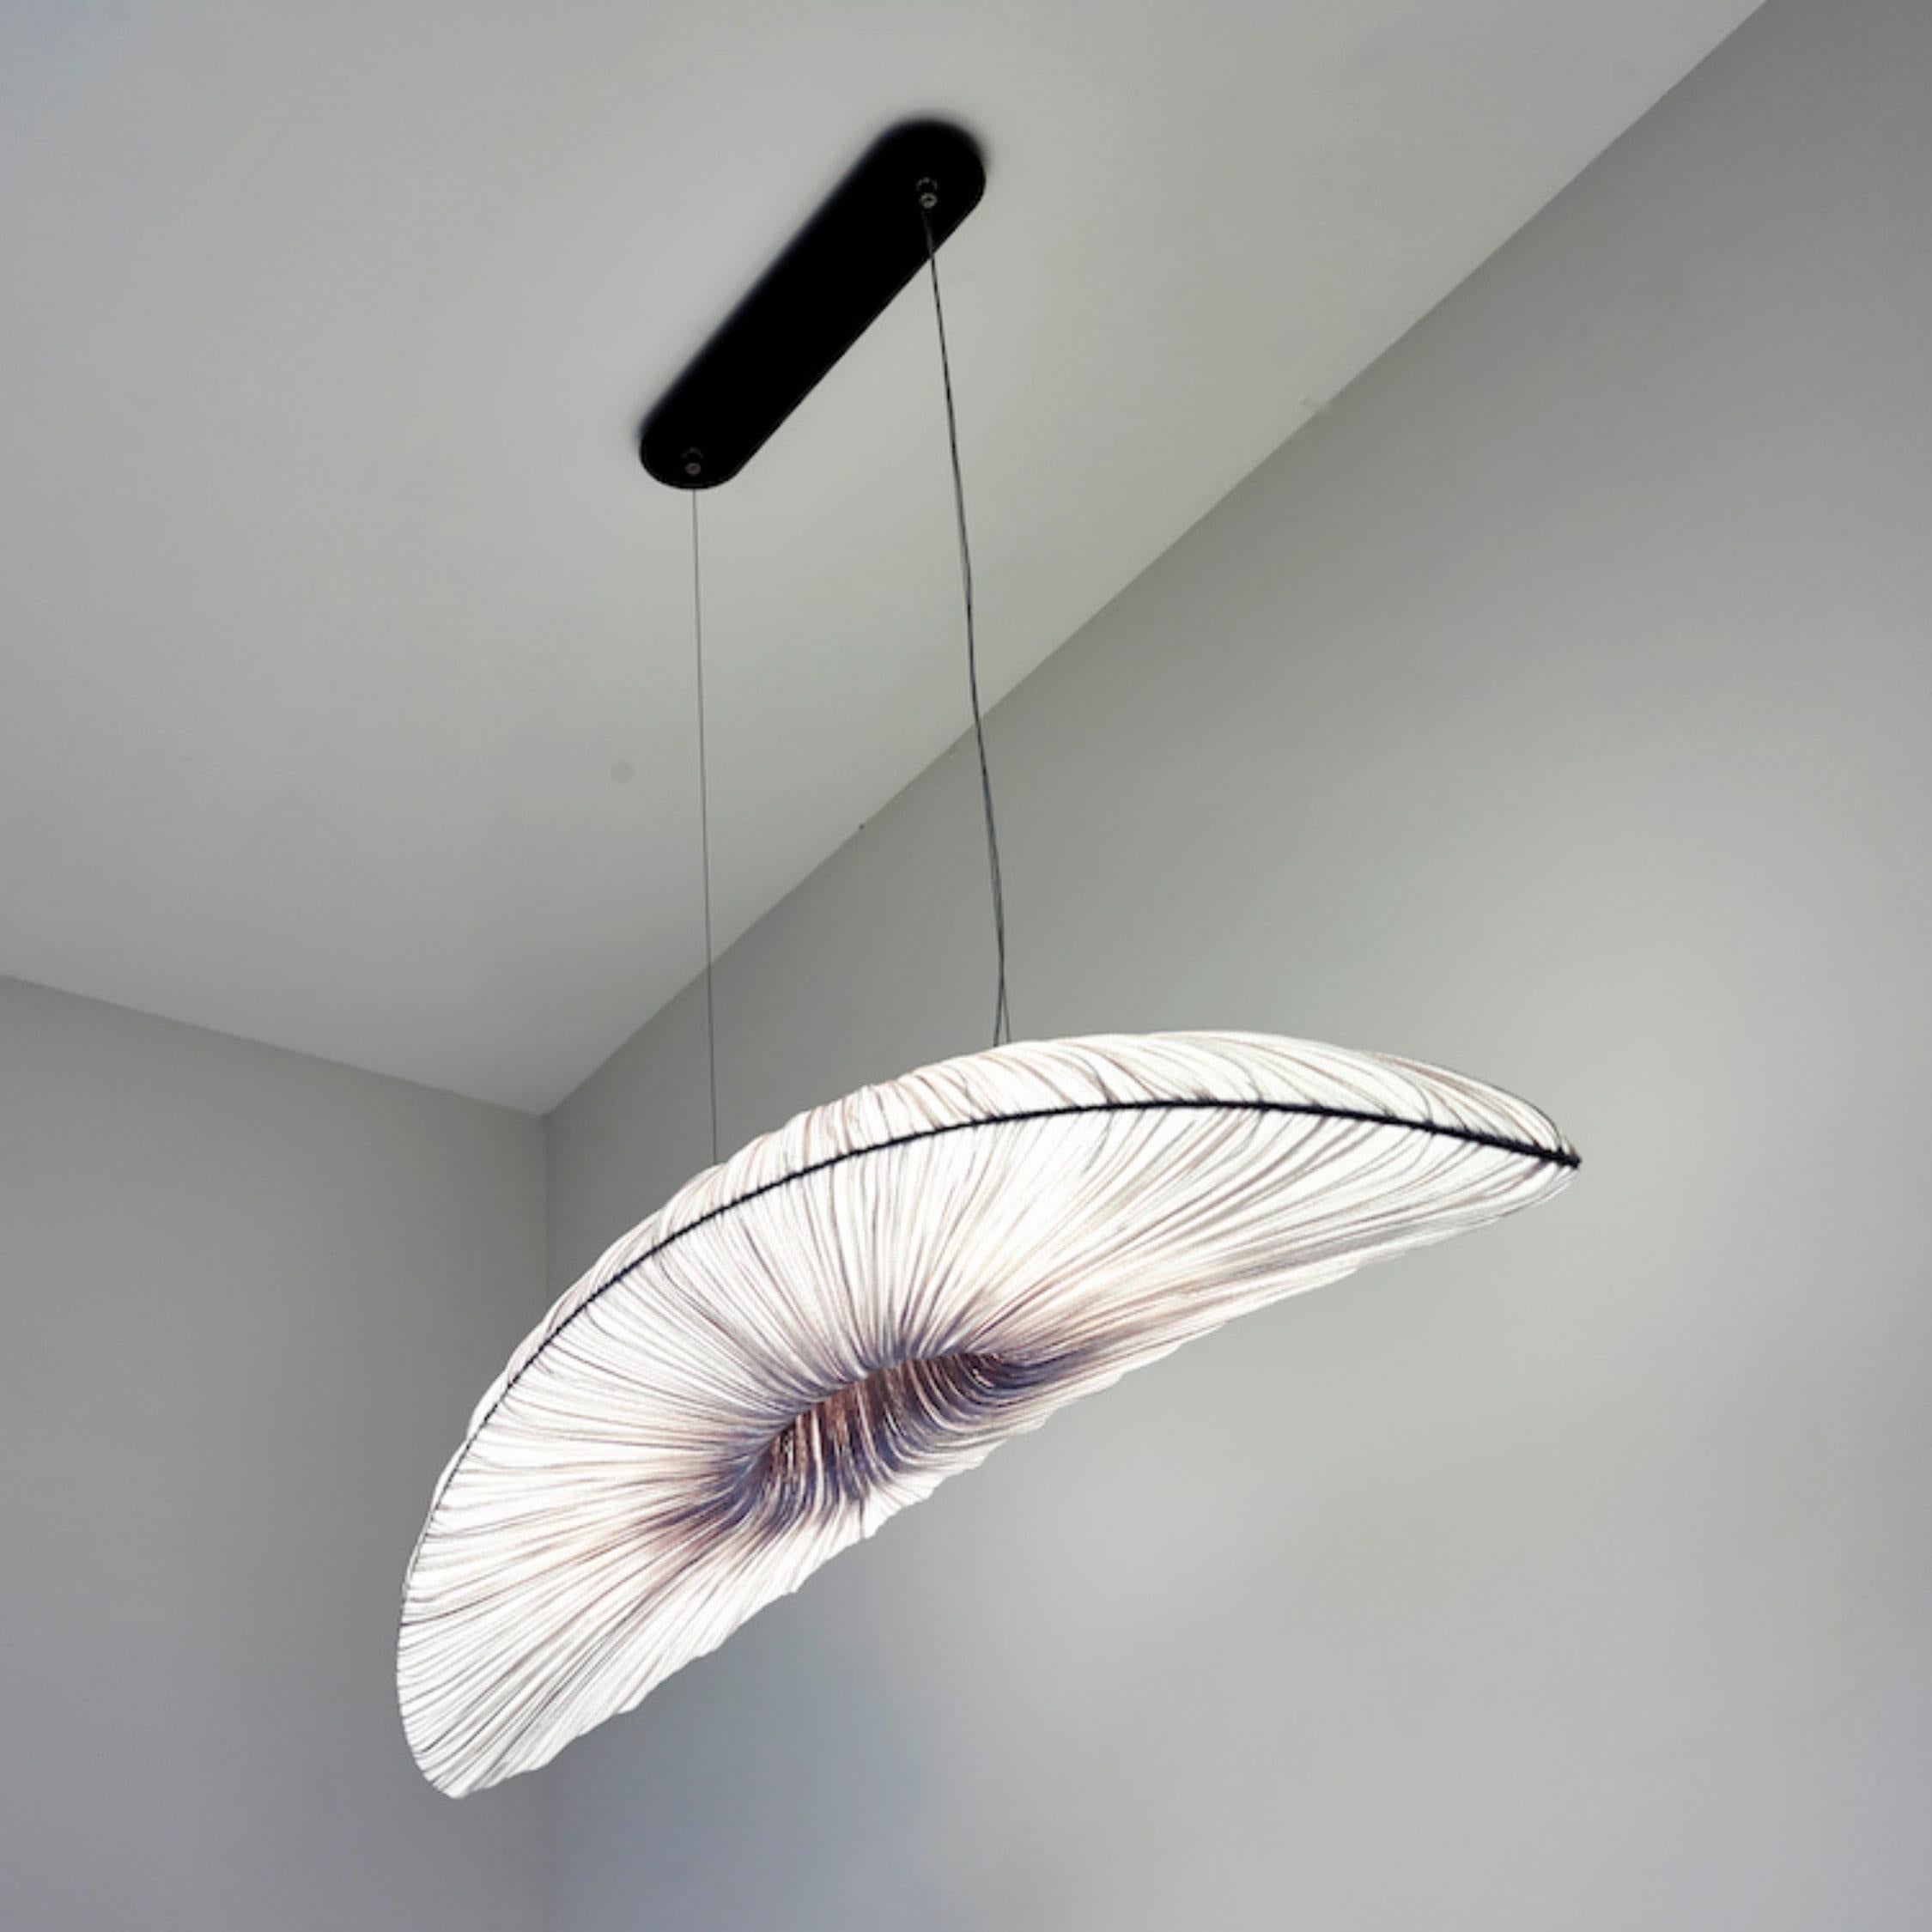 The liana S pendant light is the perfect addition to a dining room or kitchen. Part of the Orchestra Family, its concave form is inspired by natural shapes found in music, as well as contemporary sculpture and architecture. The hanging pendant is